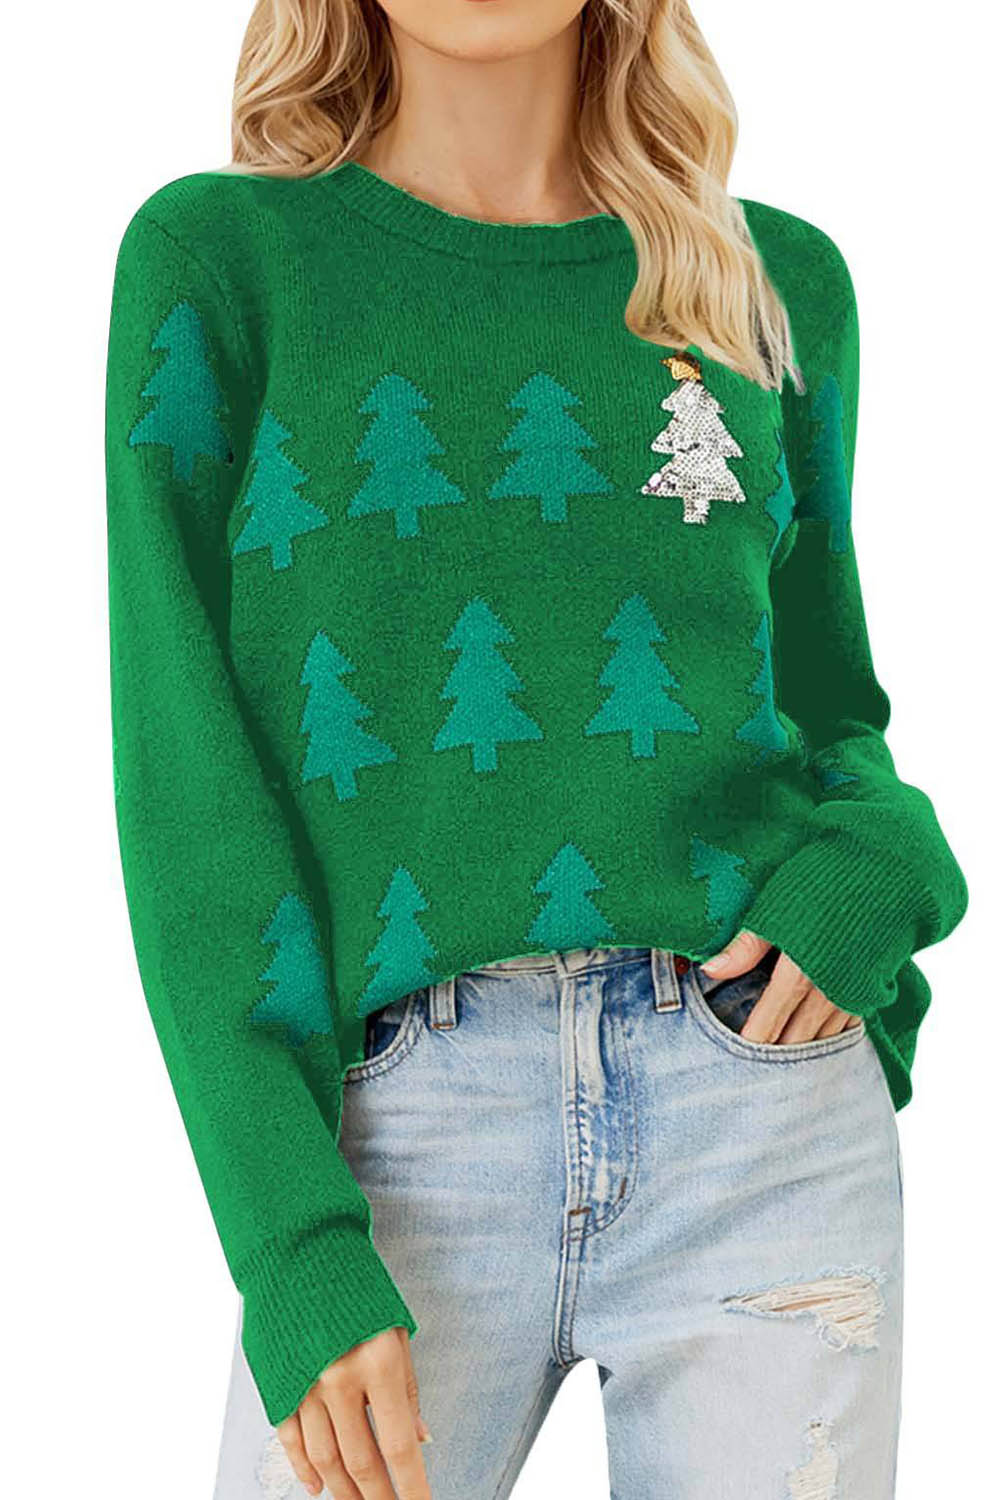 Black Christmas Tree Sweater with Long Sleeves